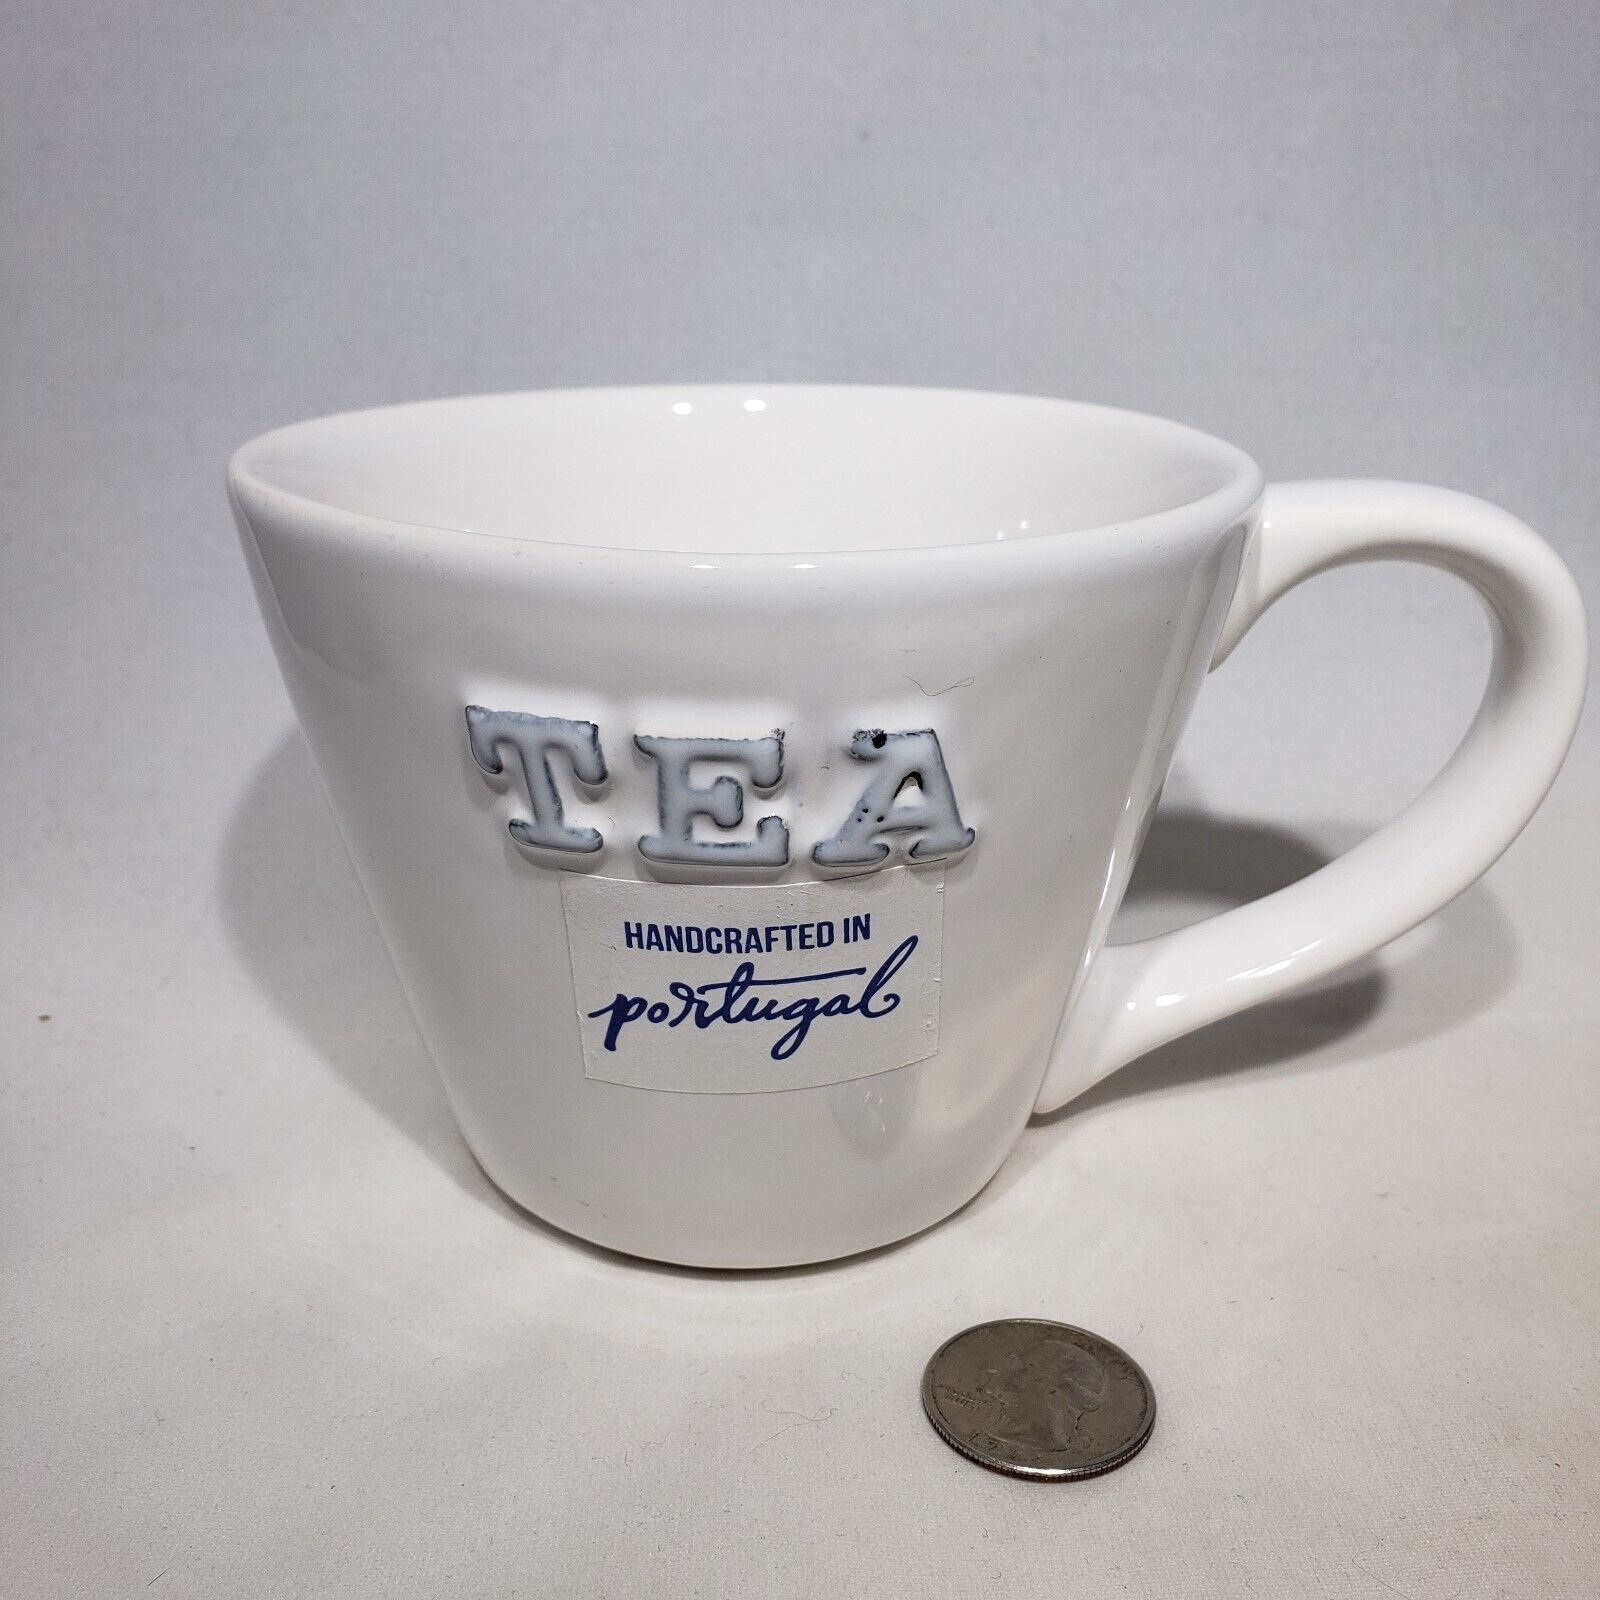 Primary image for Primagera Ceramic White 3D Raised Letters TEA Mug 16 oz Handcrafted in Portugal